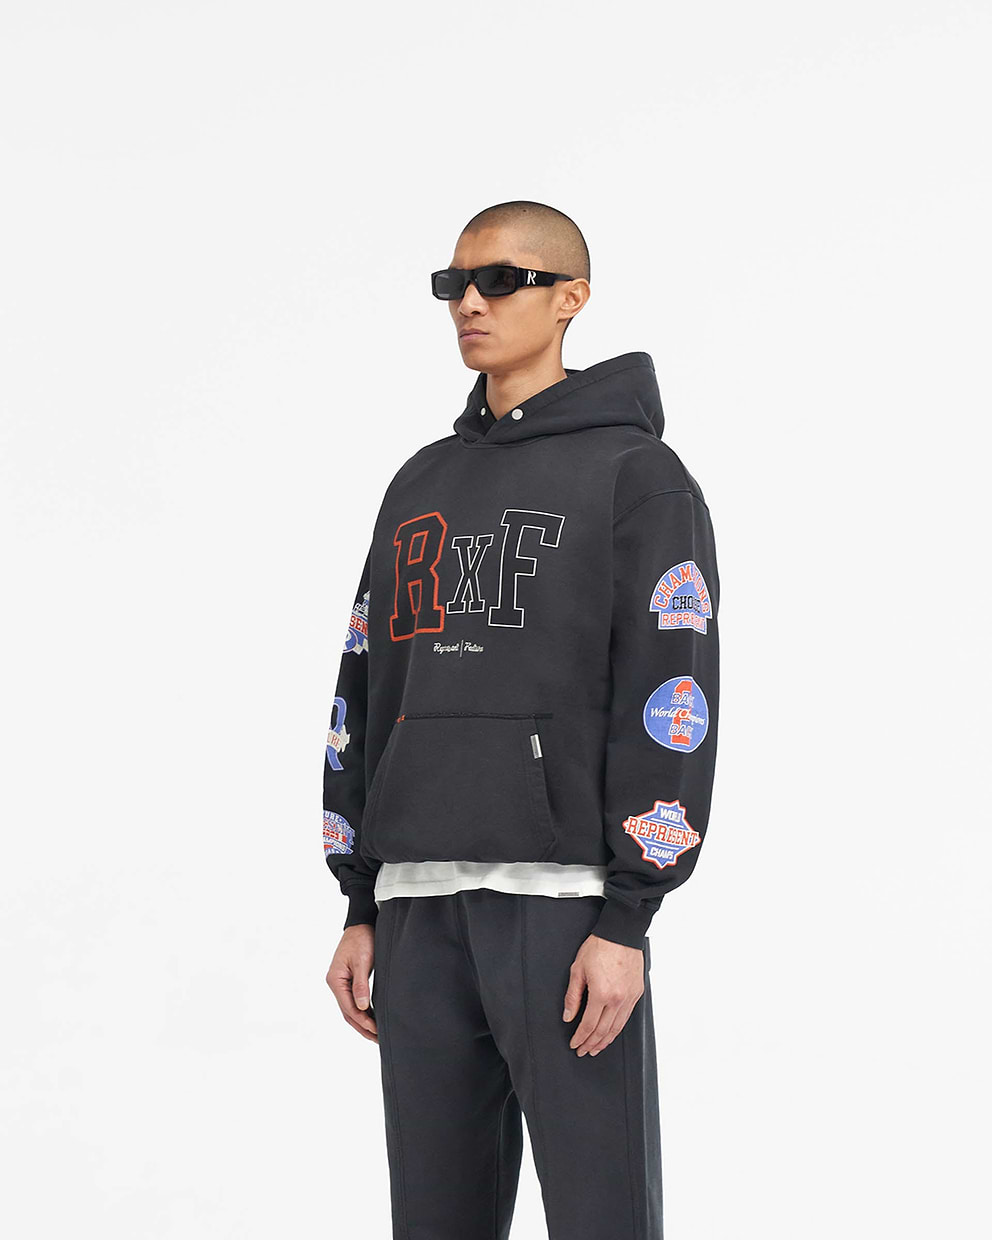 Represent X Feature Champions Hoodie - Stained Black